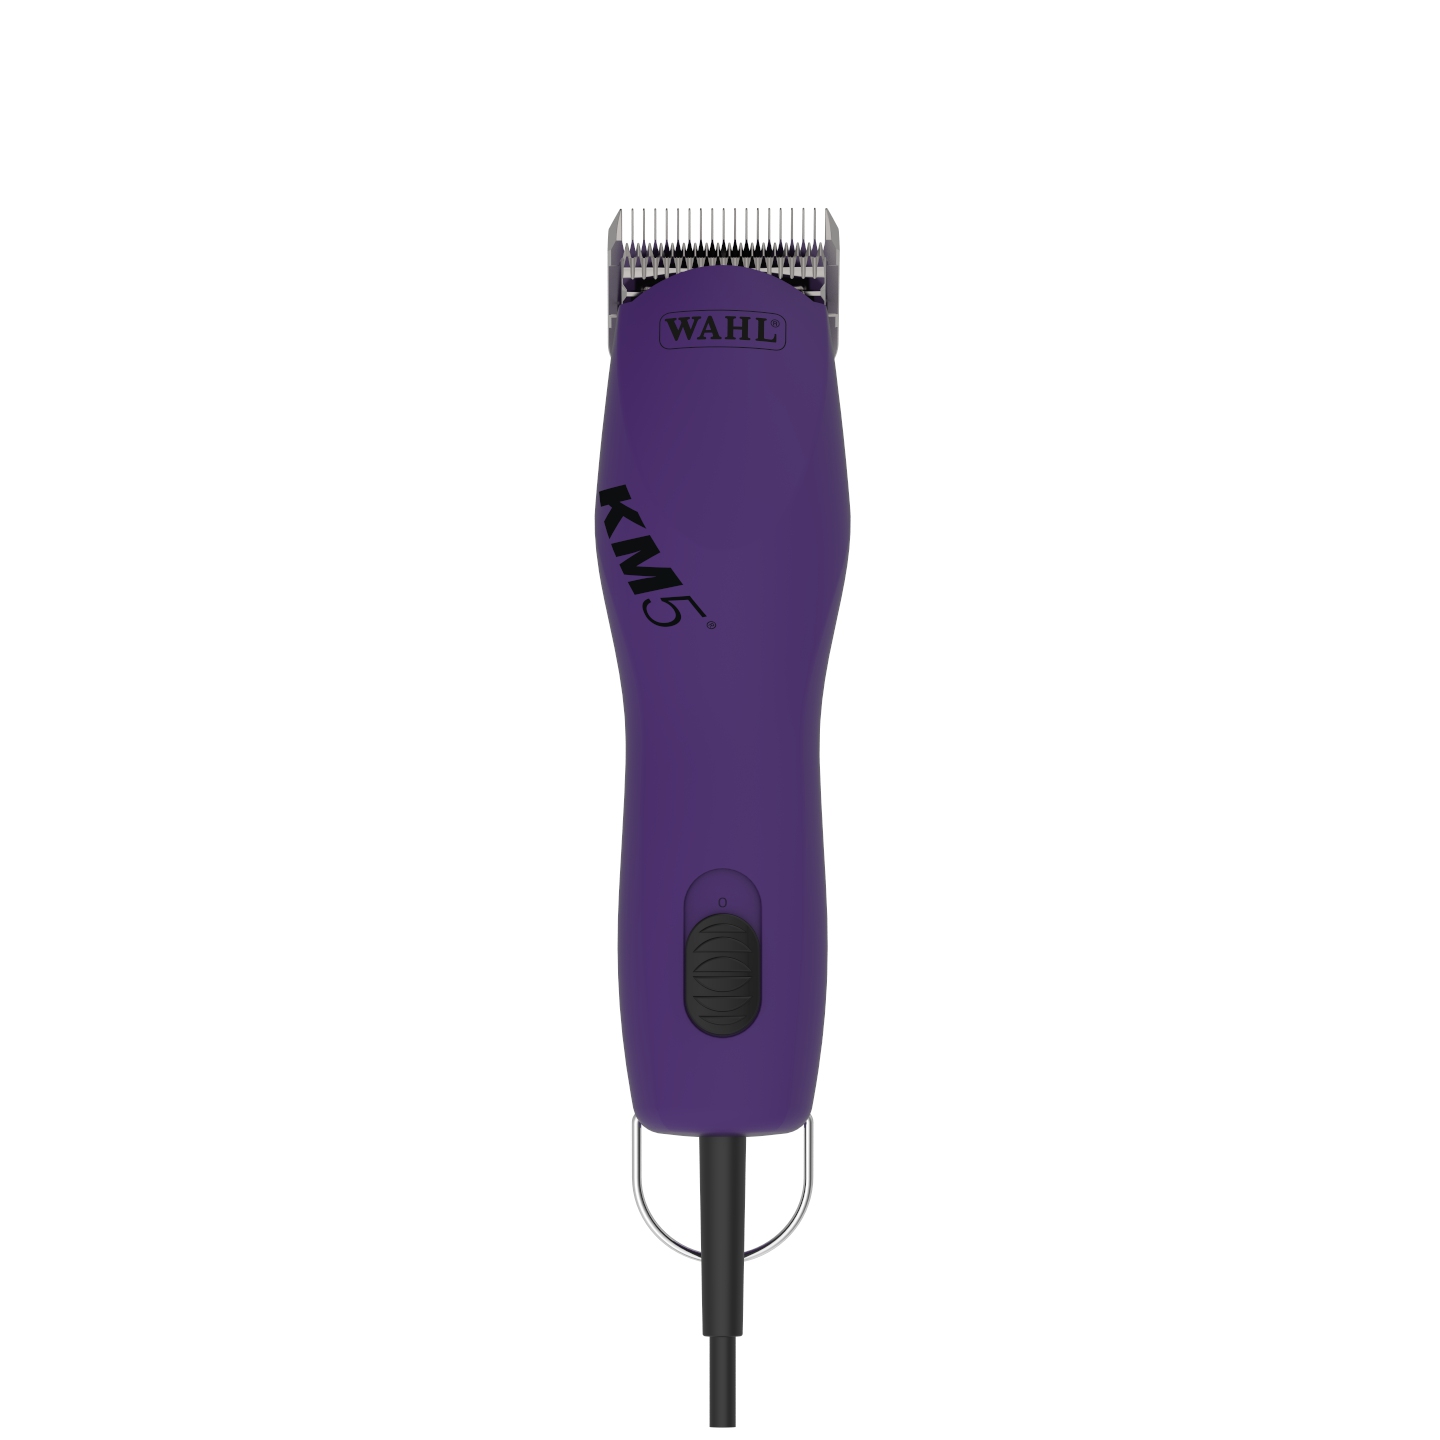 dog grooming clippers uk